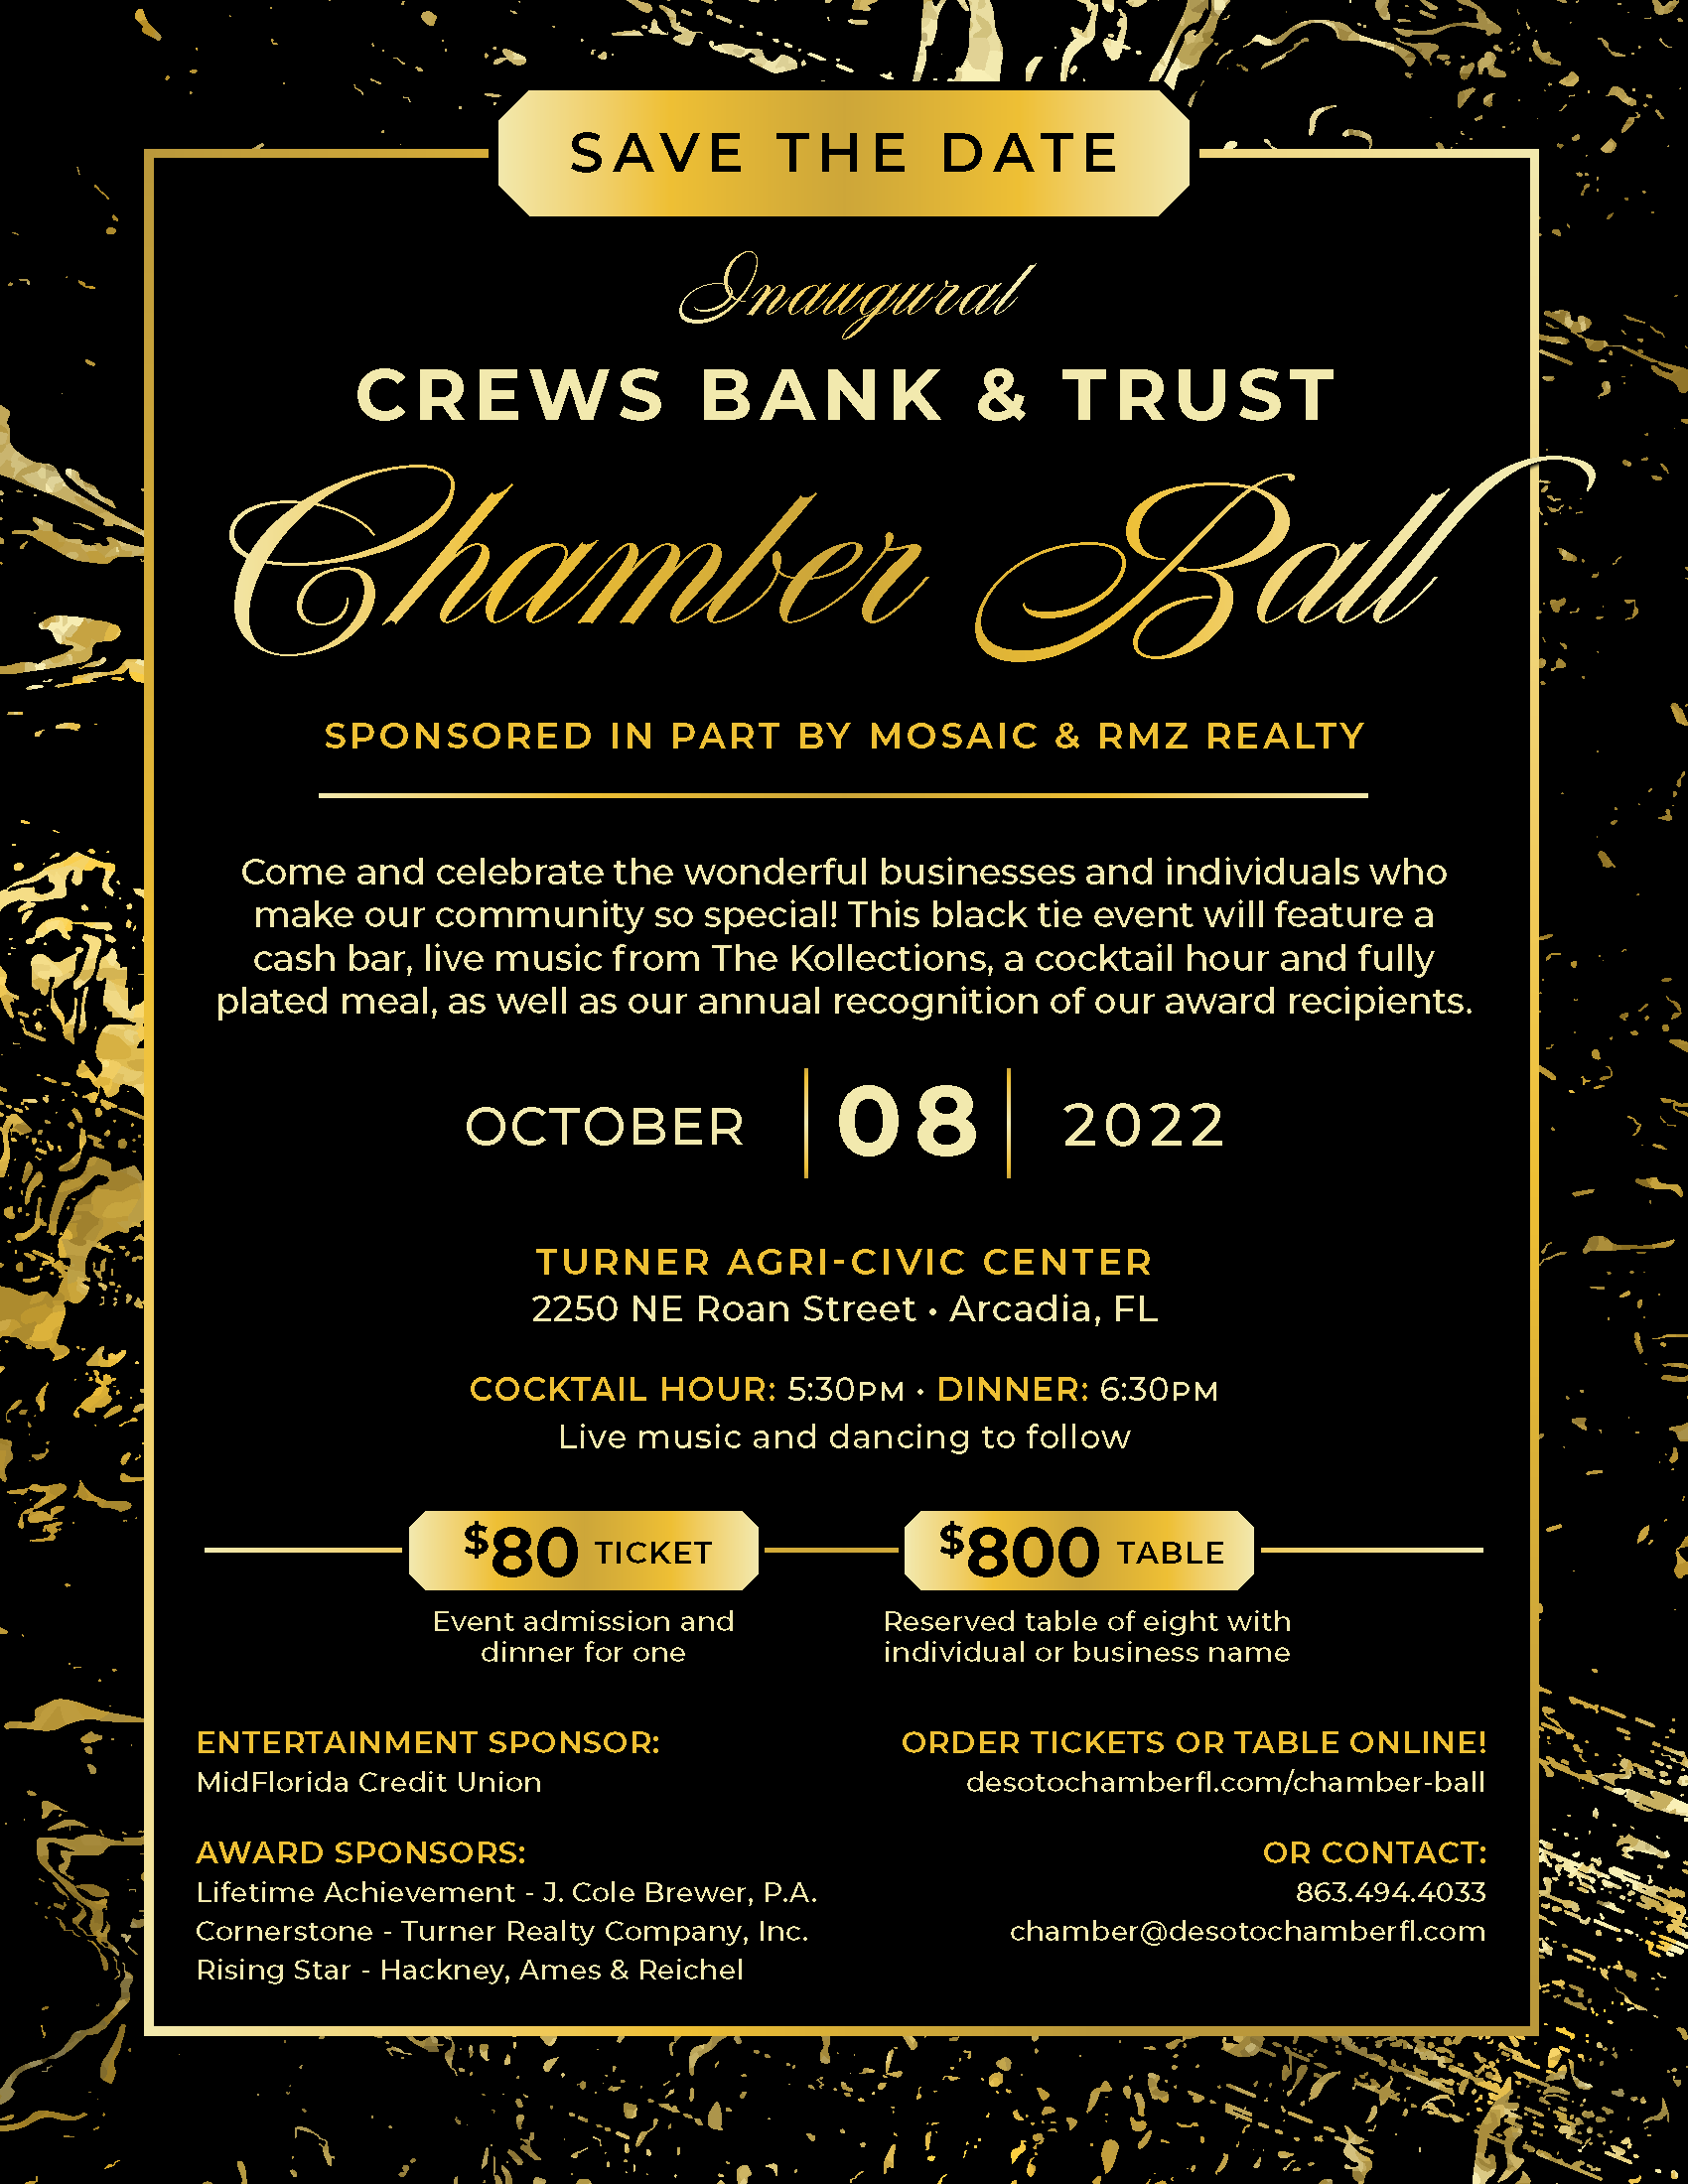 10207-Event Flyer_Chamber Ball_PROOF-C[59]